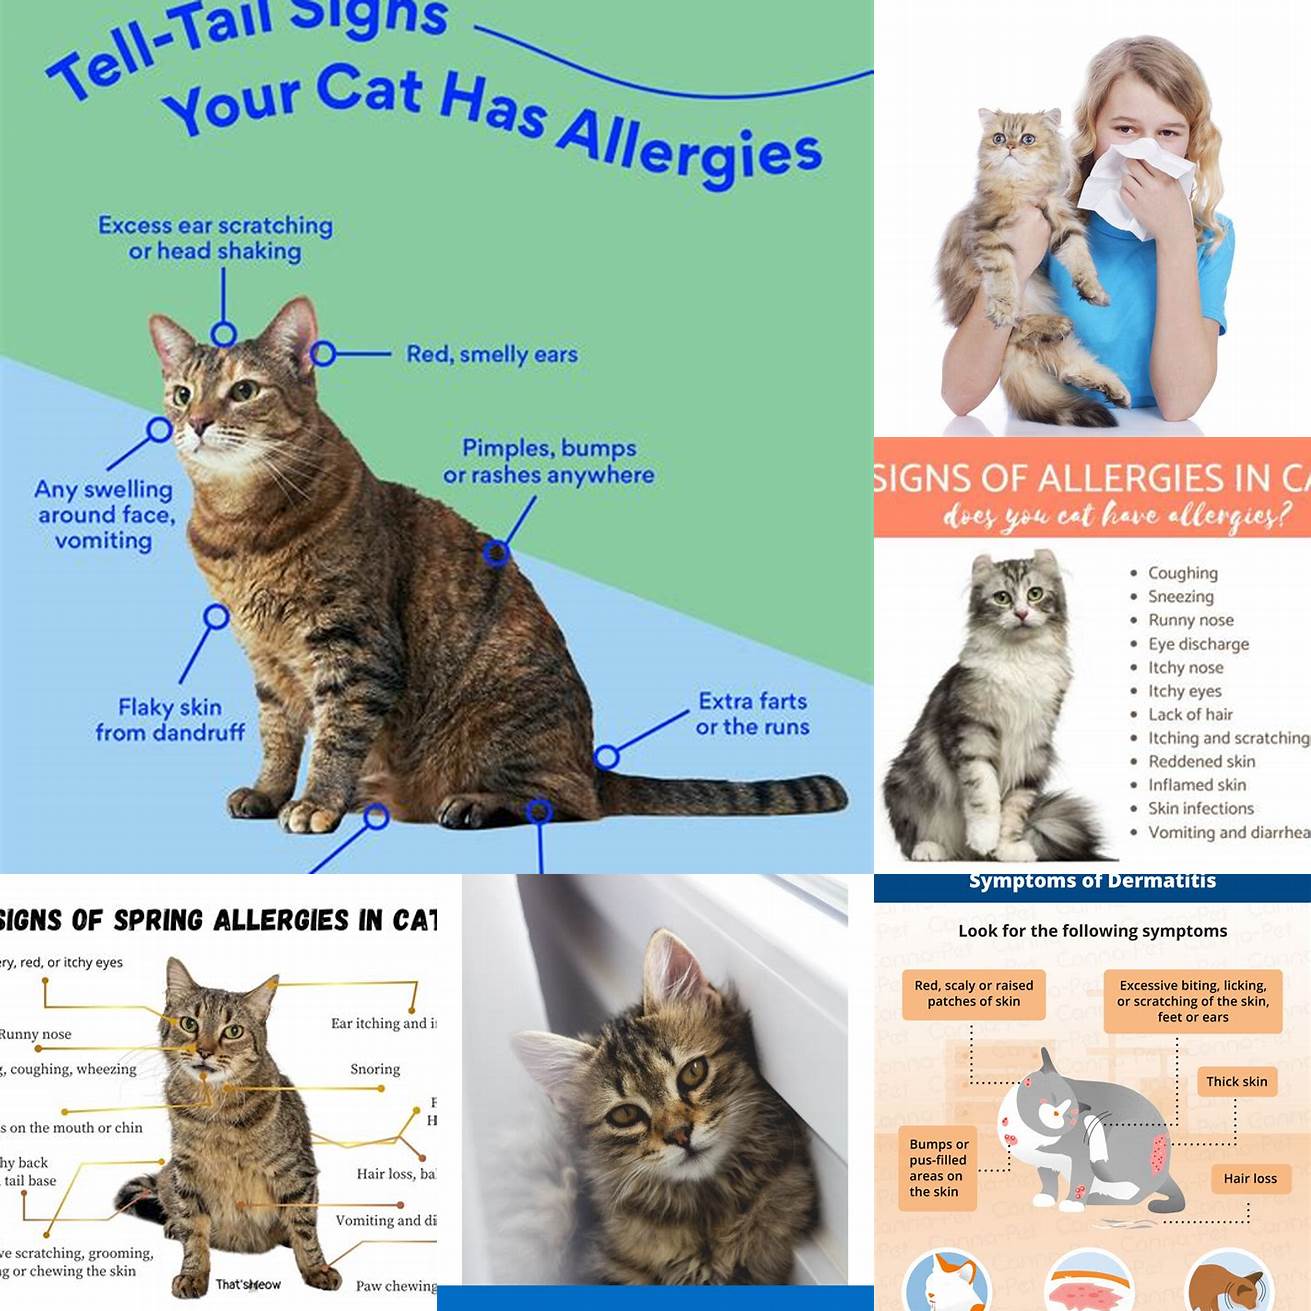 Monitor your cat for any signs of allergic reaction such as swelling hives or difficulty breathing